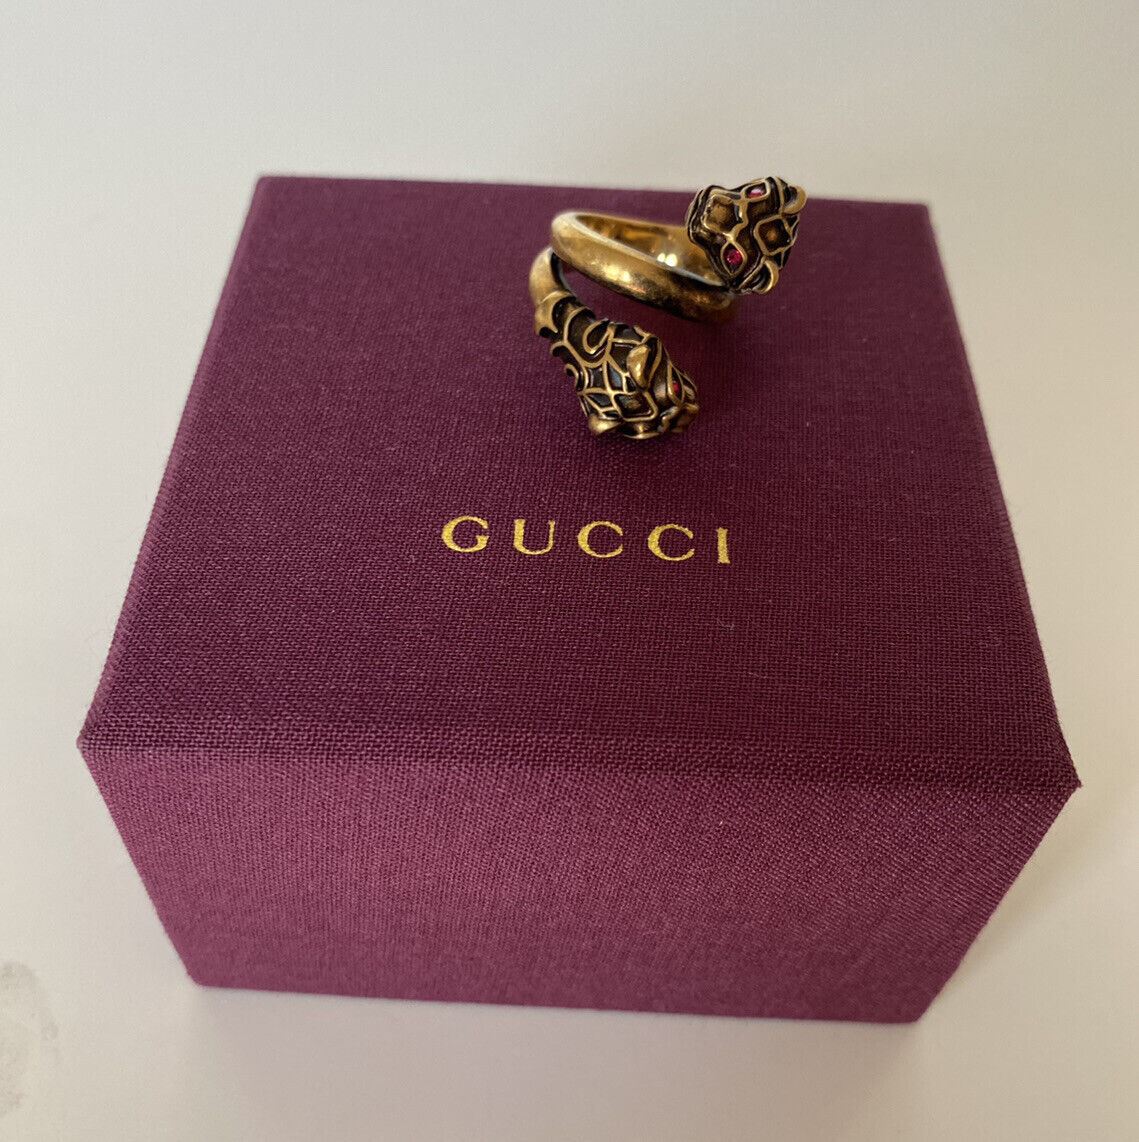 NWB Authentic GUCCI Red Crystal Gucci Tiger Head Ring Size 13 (16.8 mm) Italy